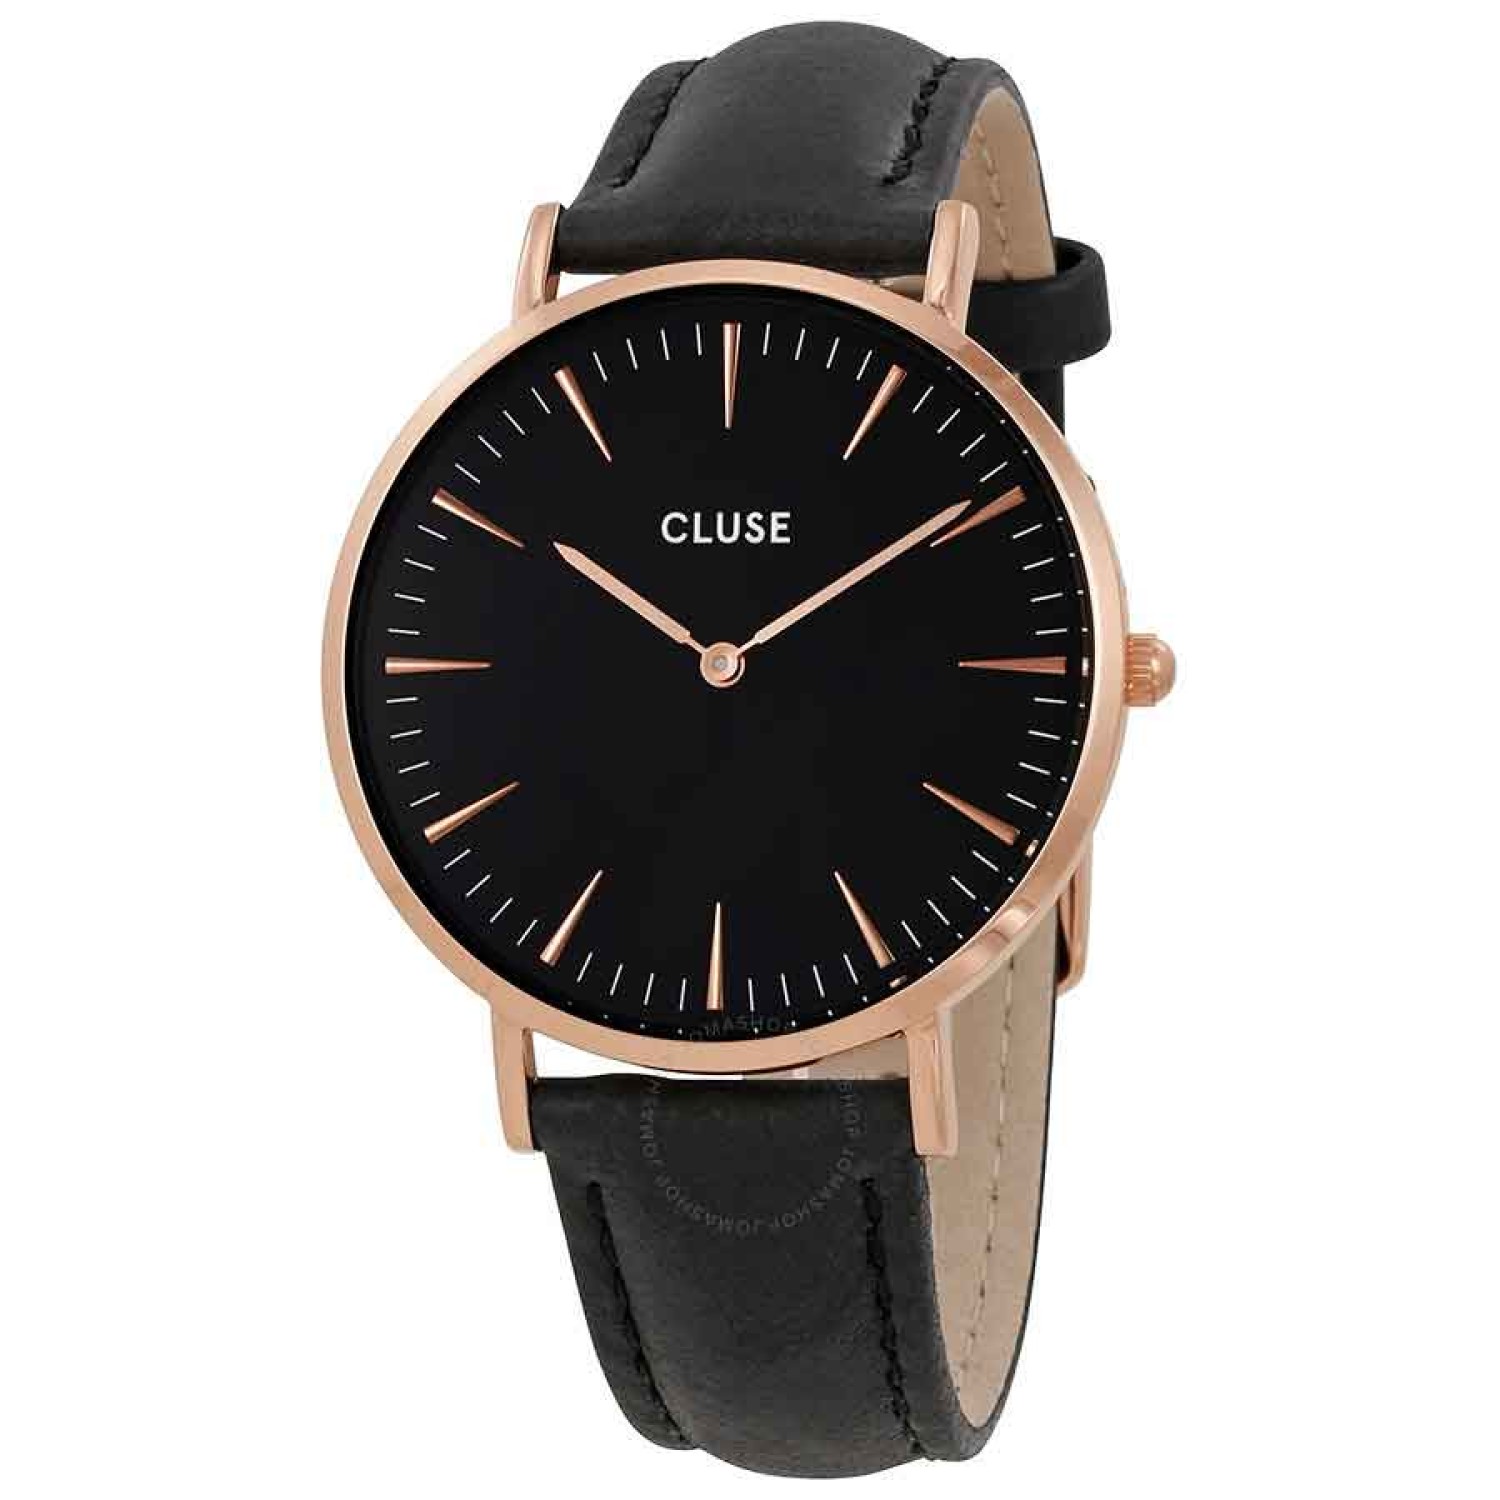 CL18001 CLUSE La Bohème Rose Gold Watch. The CLUSE La Bohème model features an ultra thin case with a 38 mm diameter, crafted with precision for a sophisticated and elegant result. Black and rose gold are combined with a black leather strap, detailed with